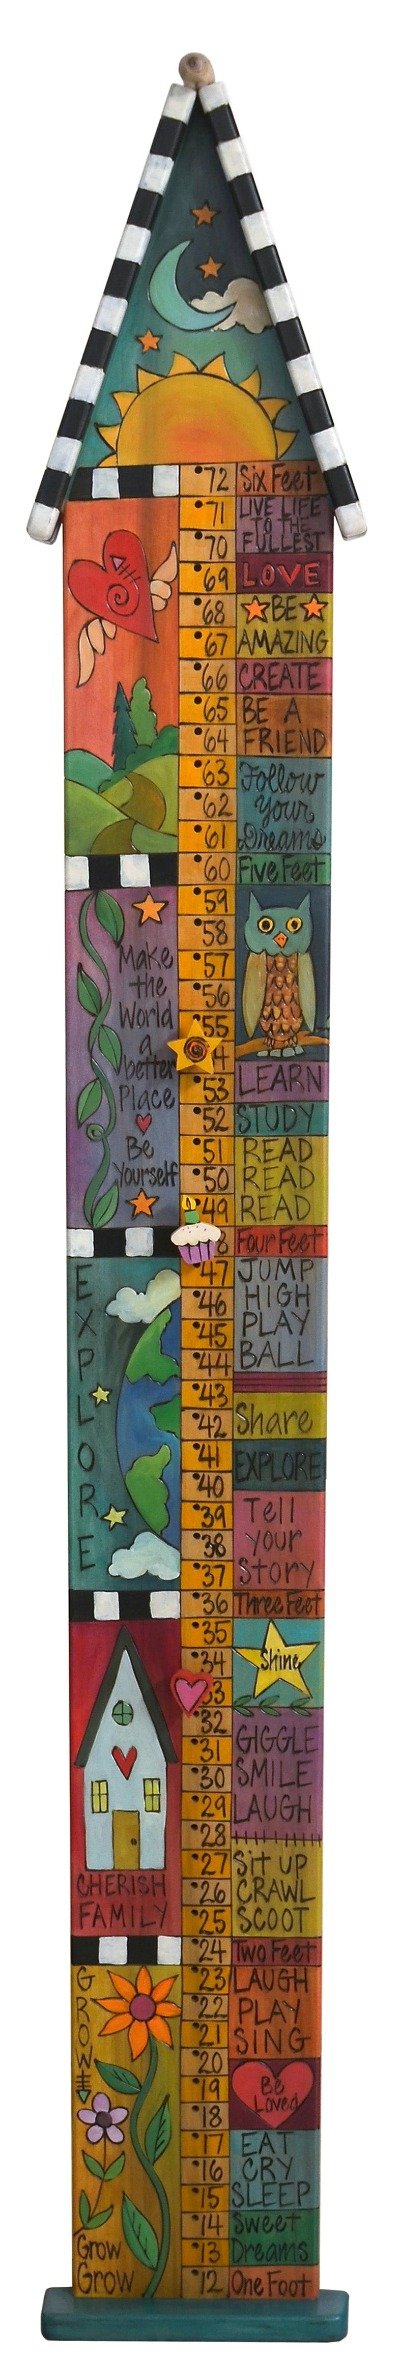 Growth Chart with Pegs